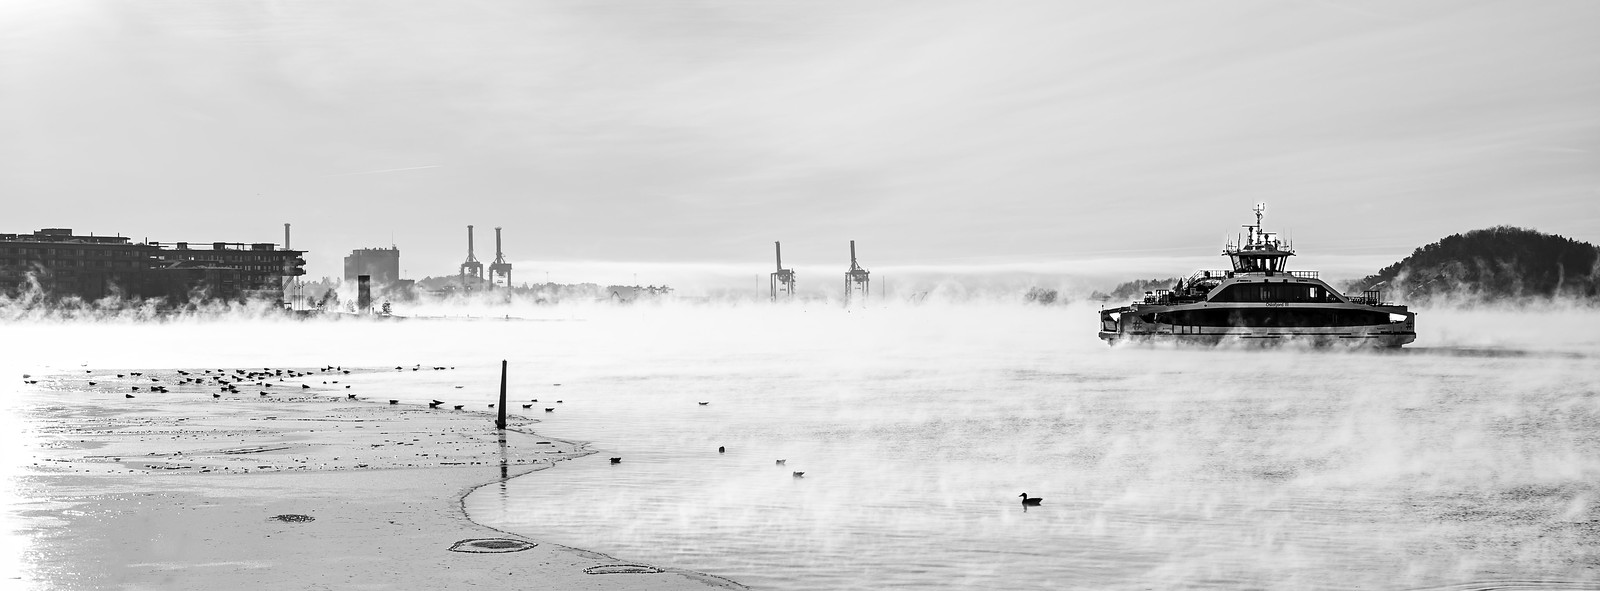 A monochromatic image of a ferry gliding over a mist-covered waterway near the Oslo Opera House, with industrial structures in the background and birds on the icy shoreline